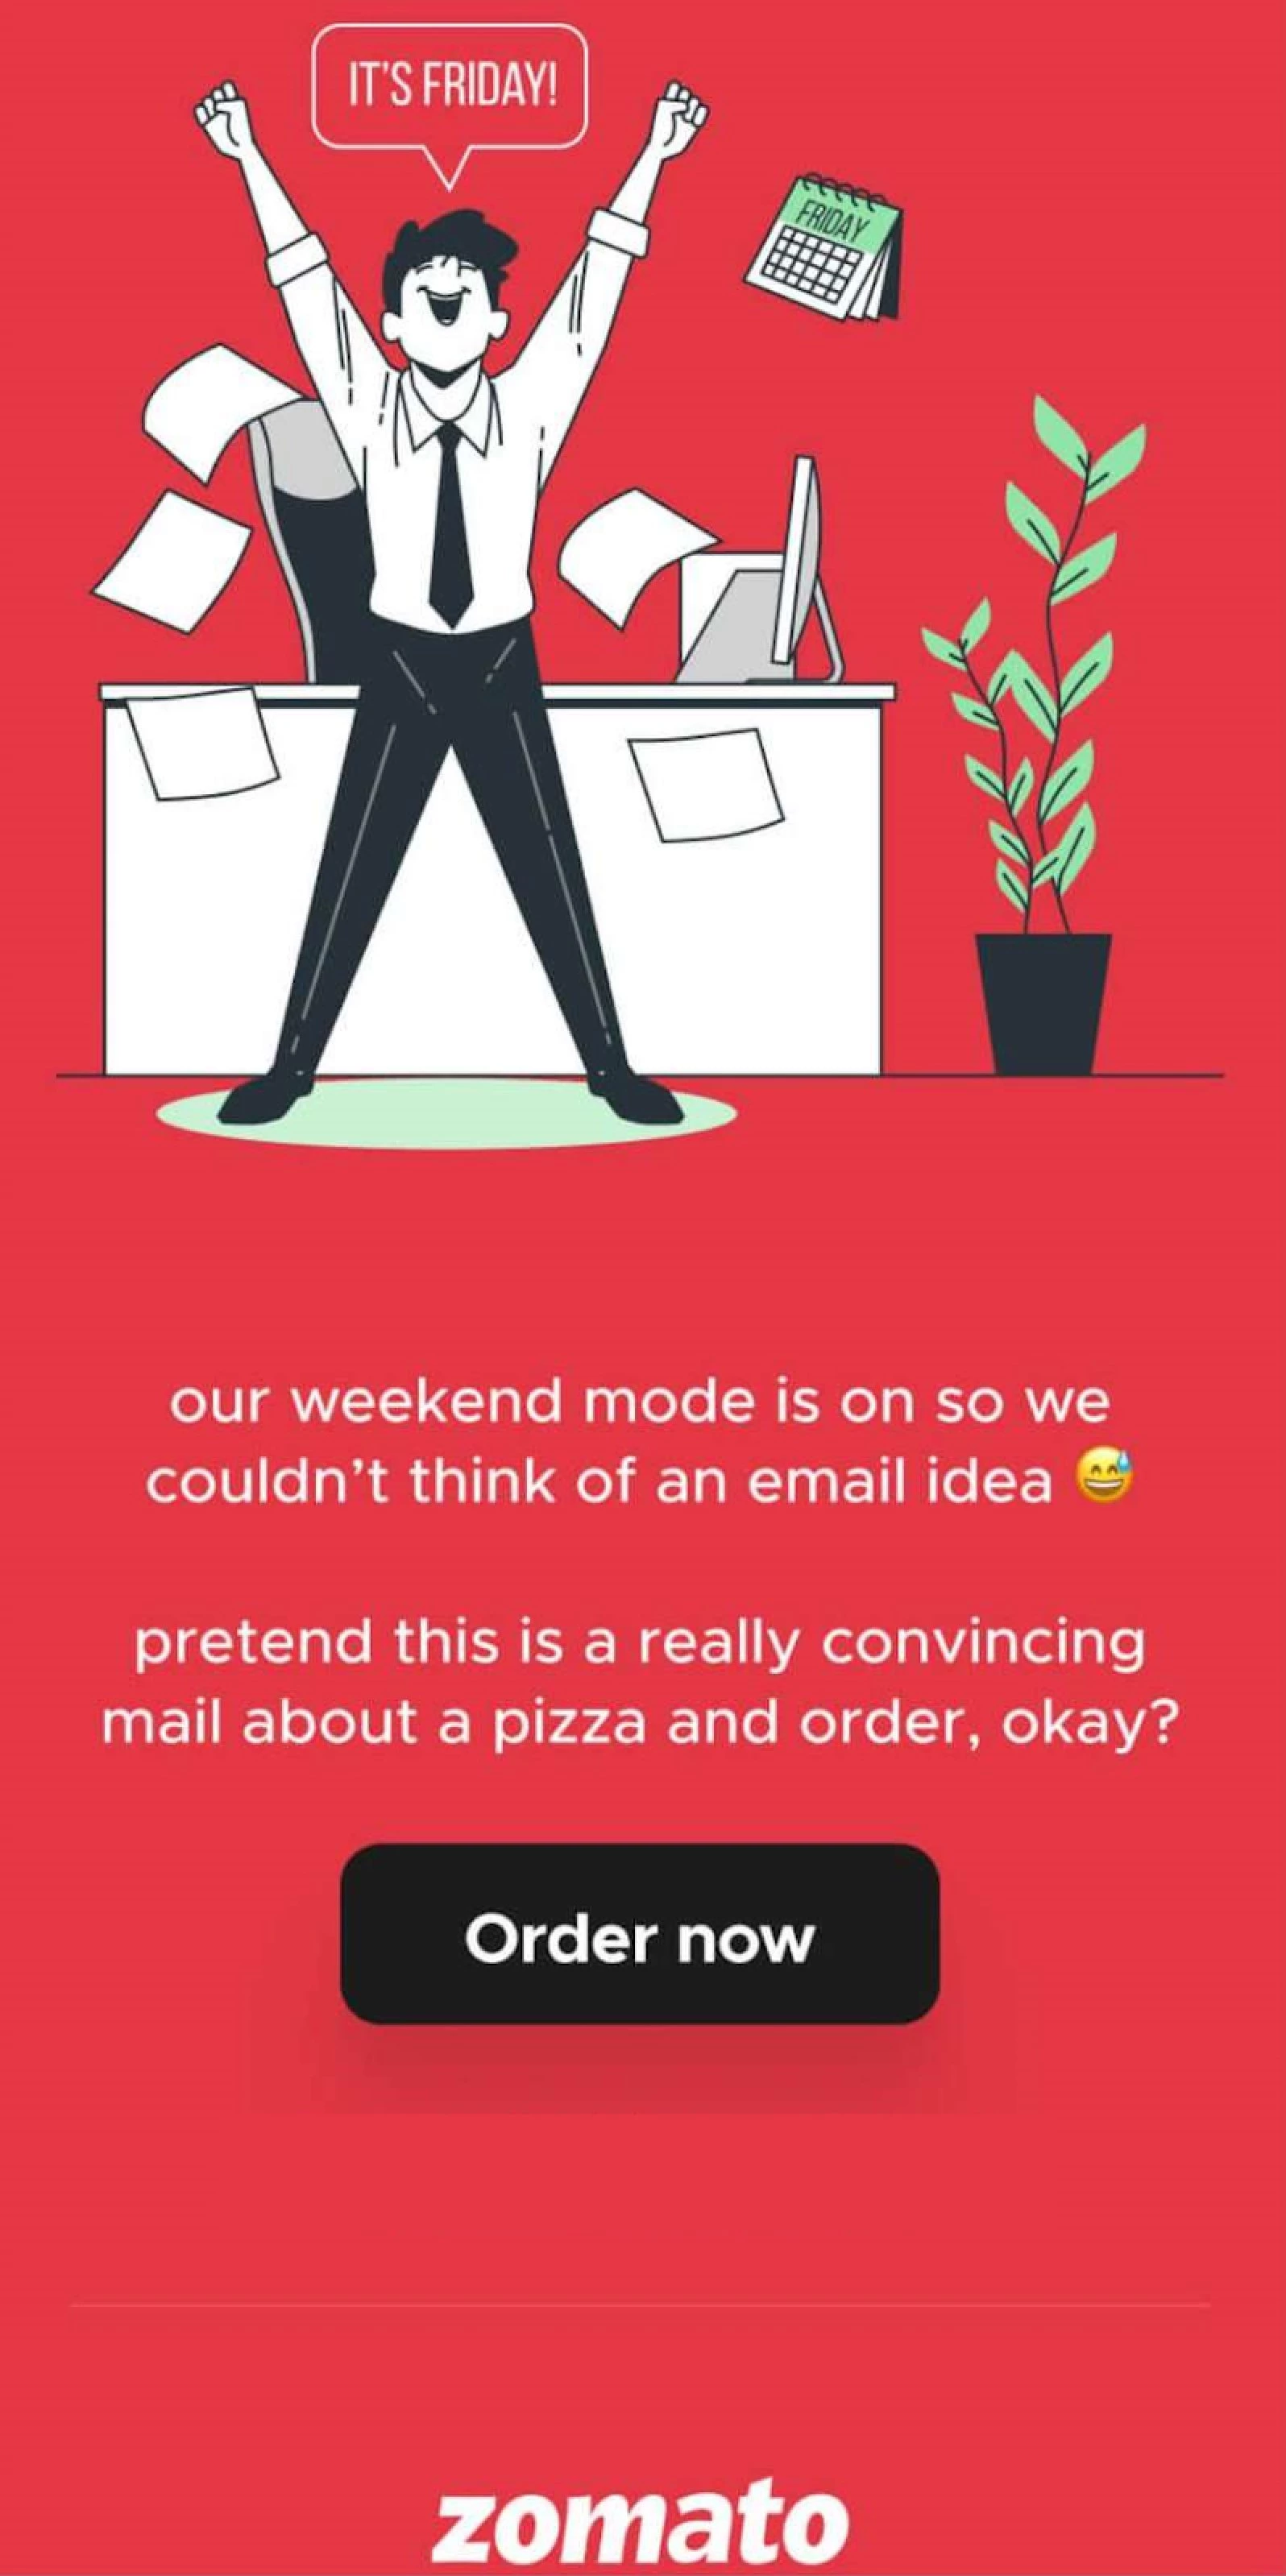 zomato red background newsletter funny promotional email example order now